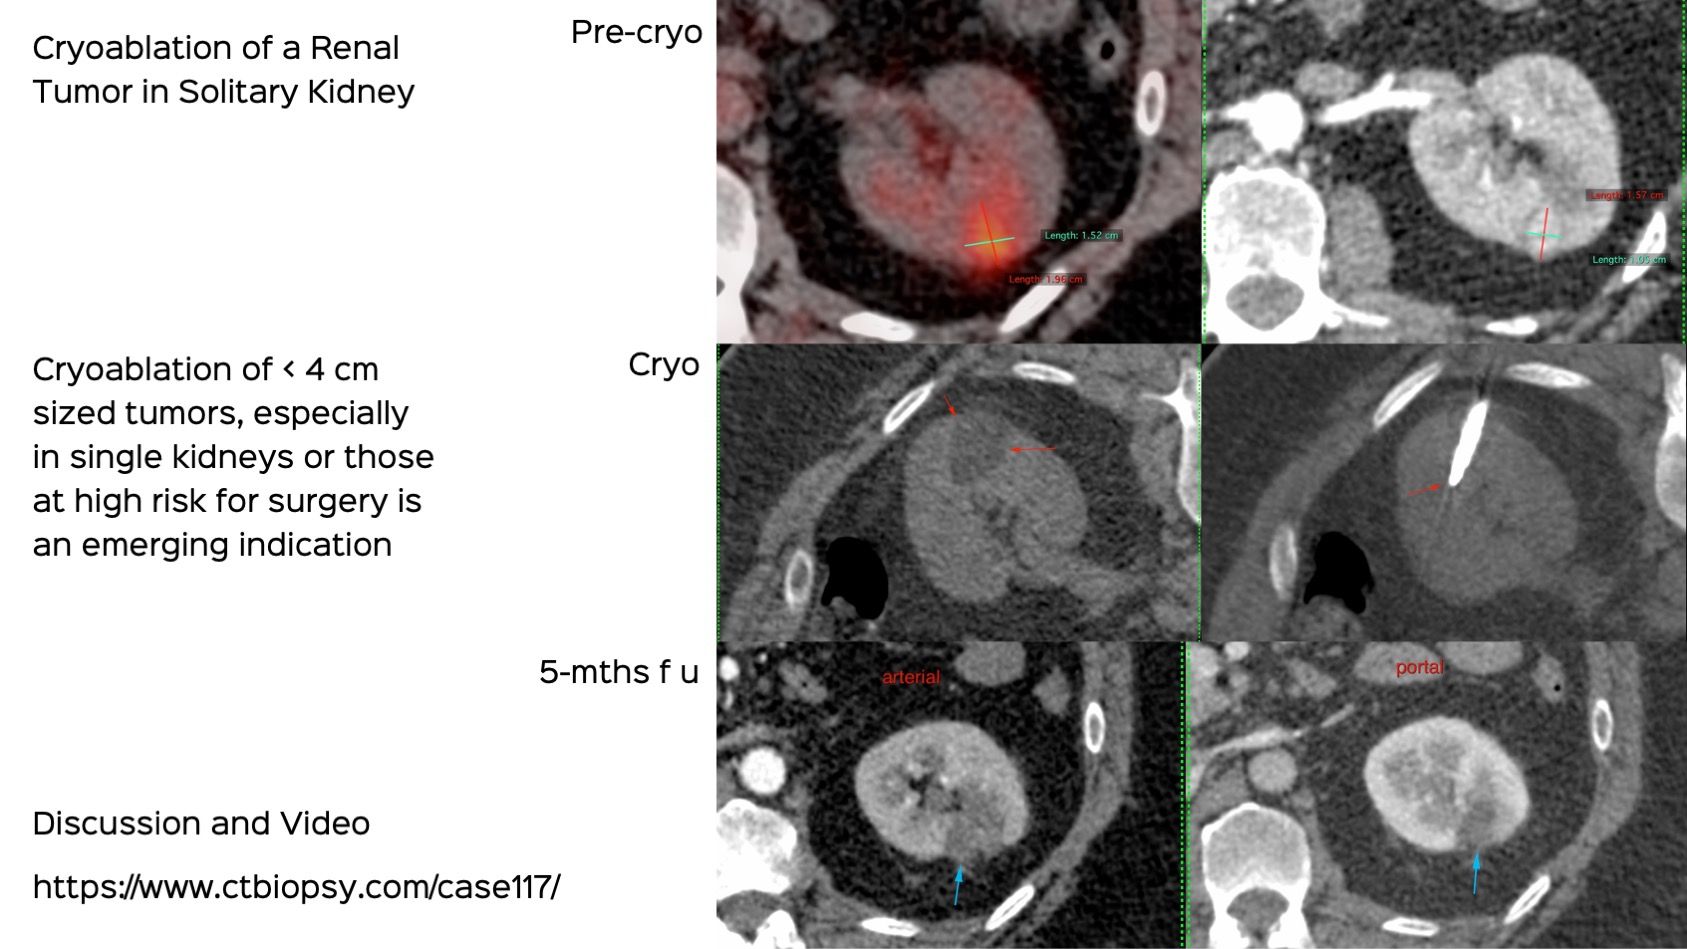 Case 117: Cryoablation of a Small Renal Tumor in a Solitary Kidney